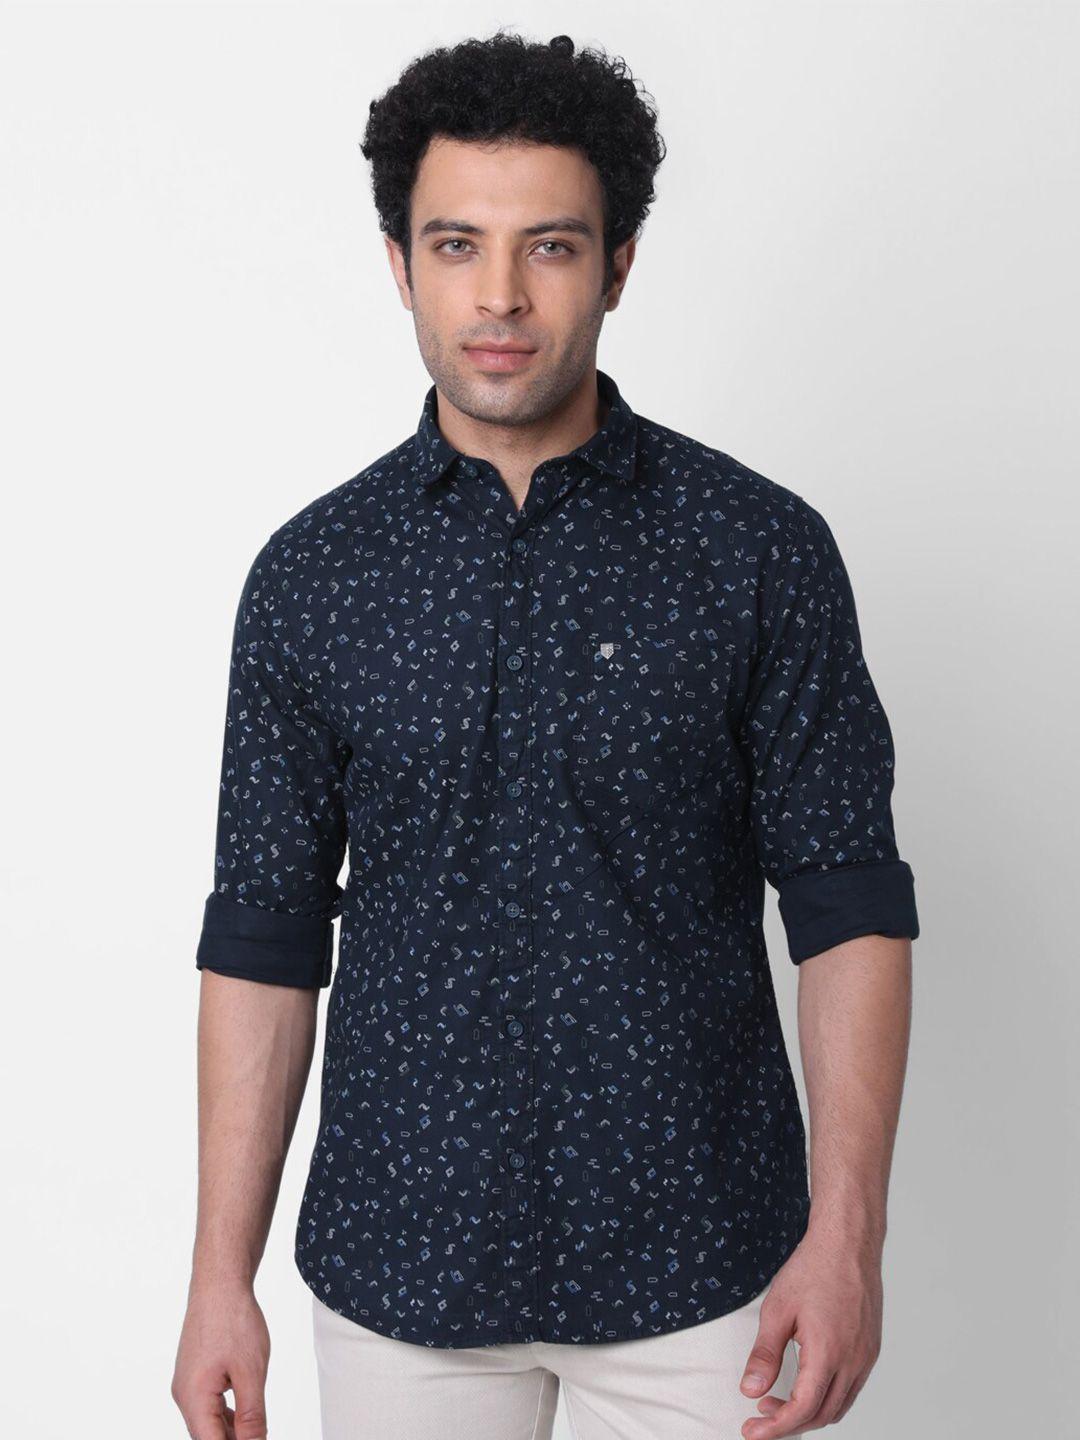 oxemberg  classic slim fit conversational printed casual cotton shirt